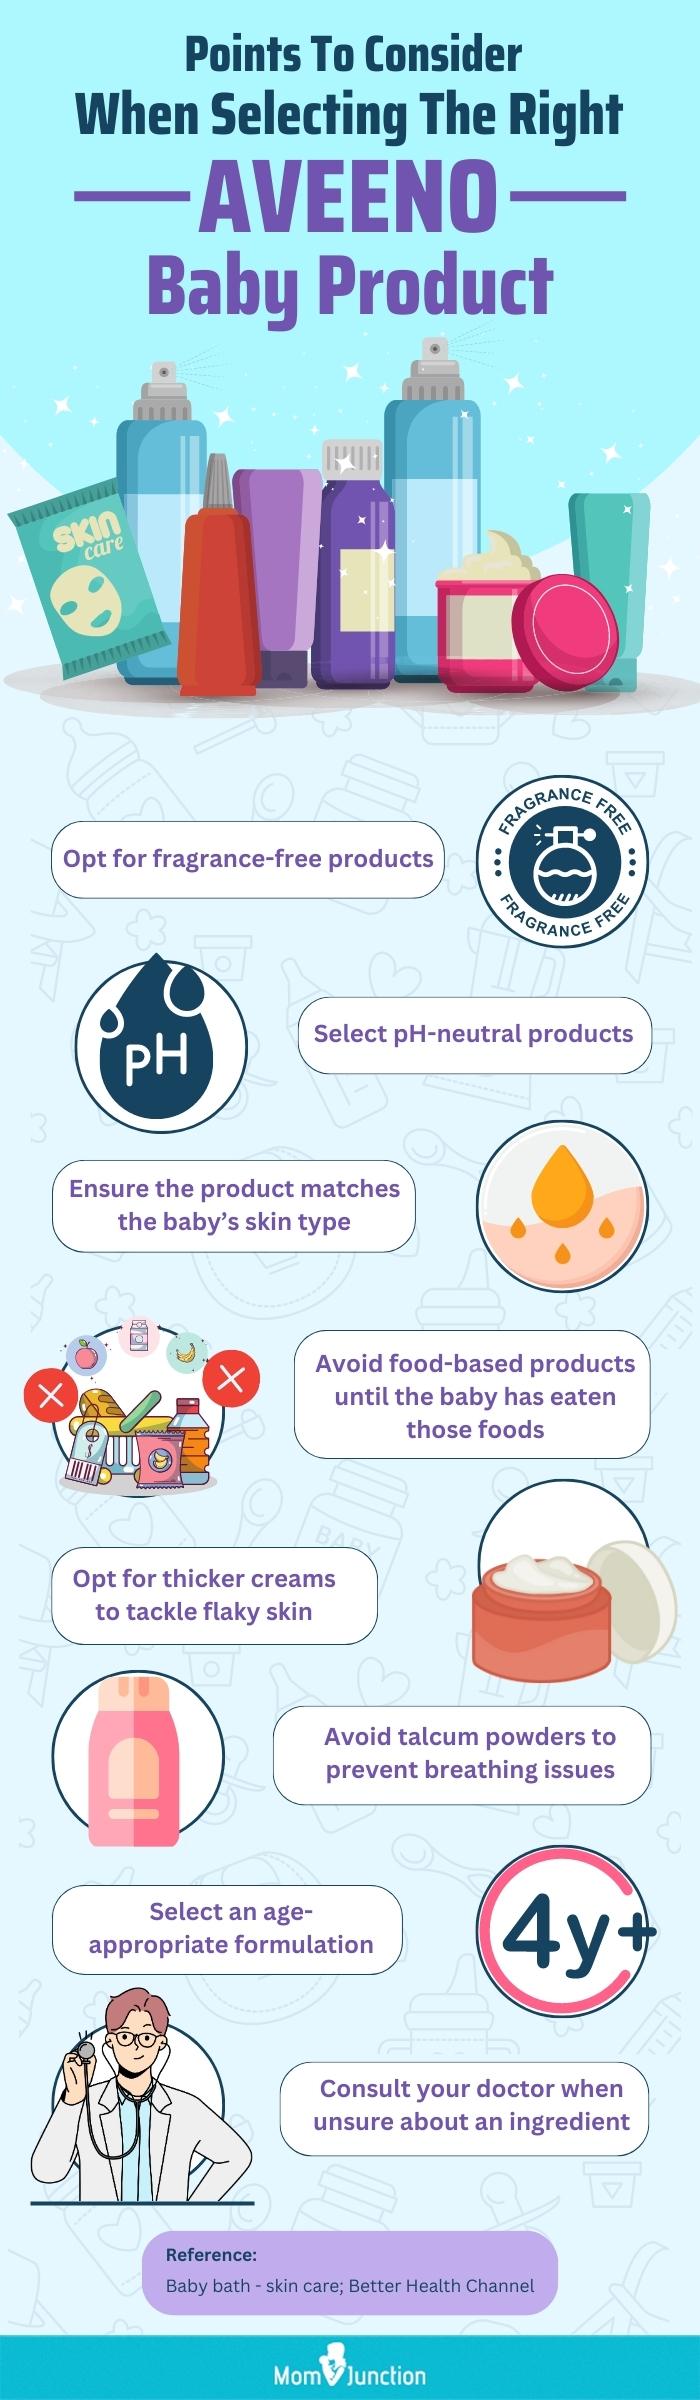 Points To Consider When Selecting The Right Aveeno Baby Product (infographic)